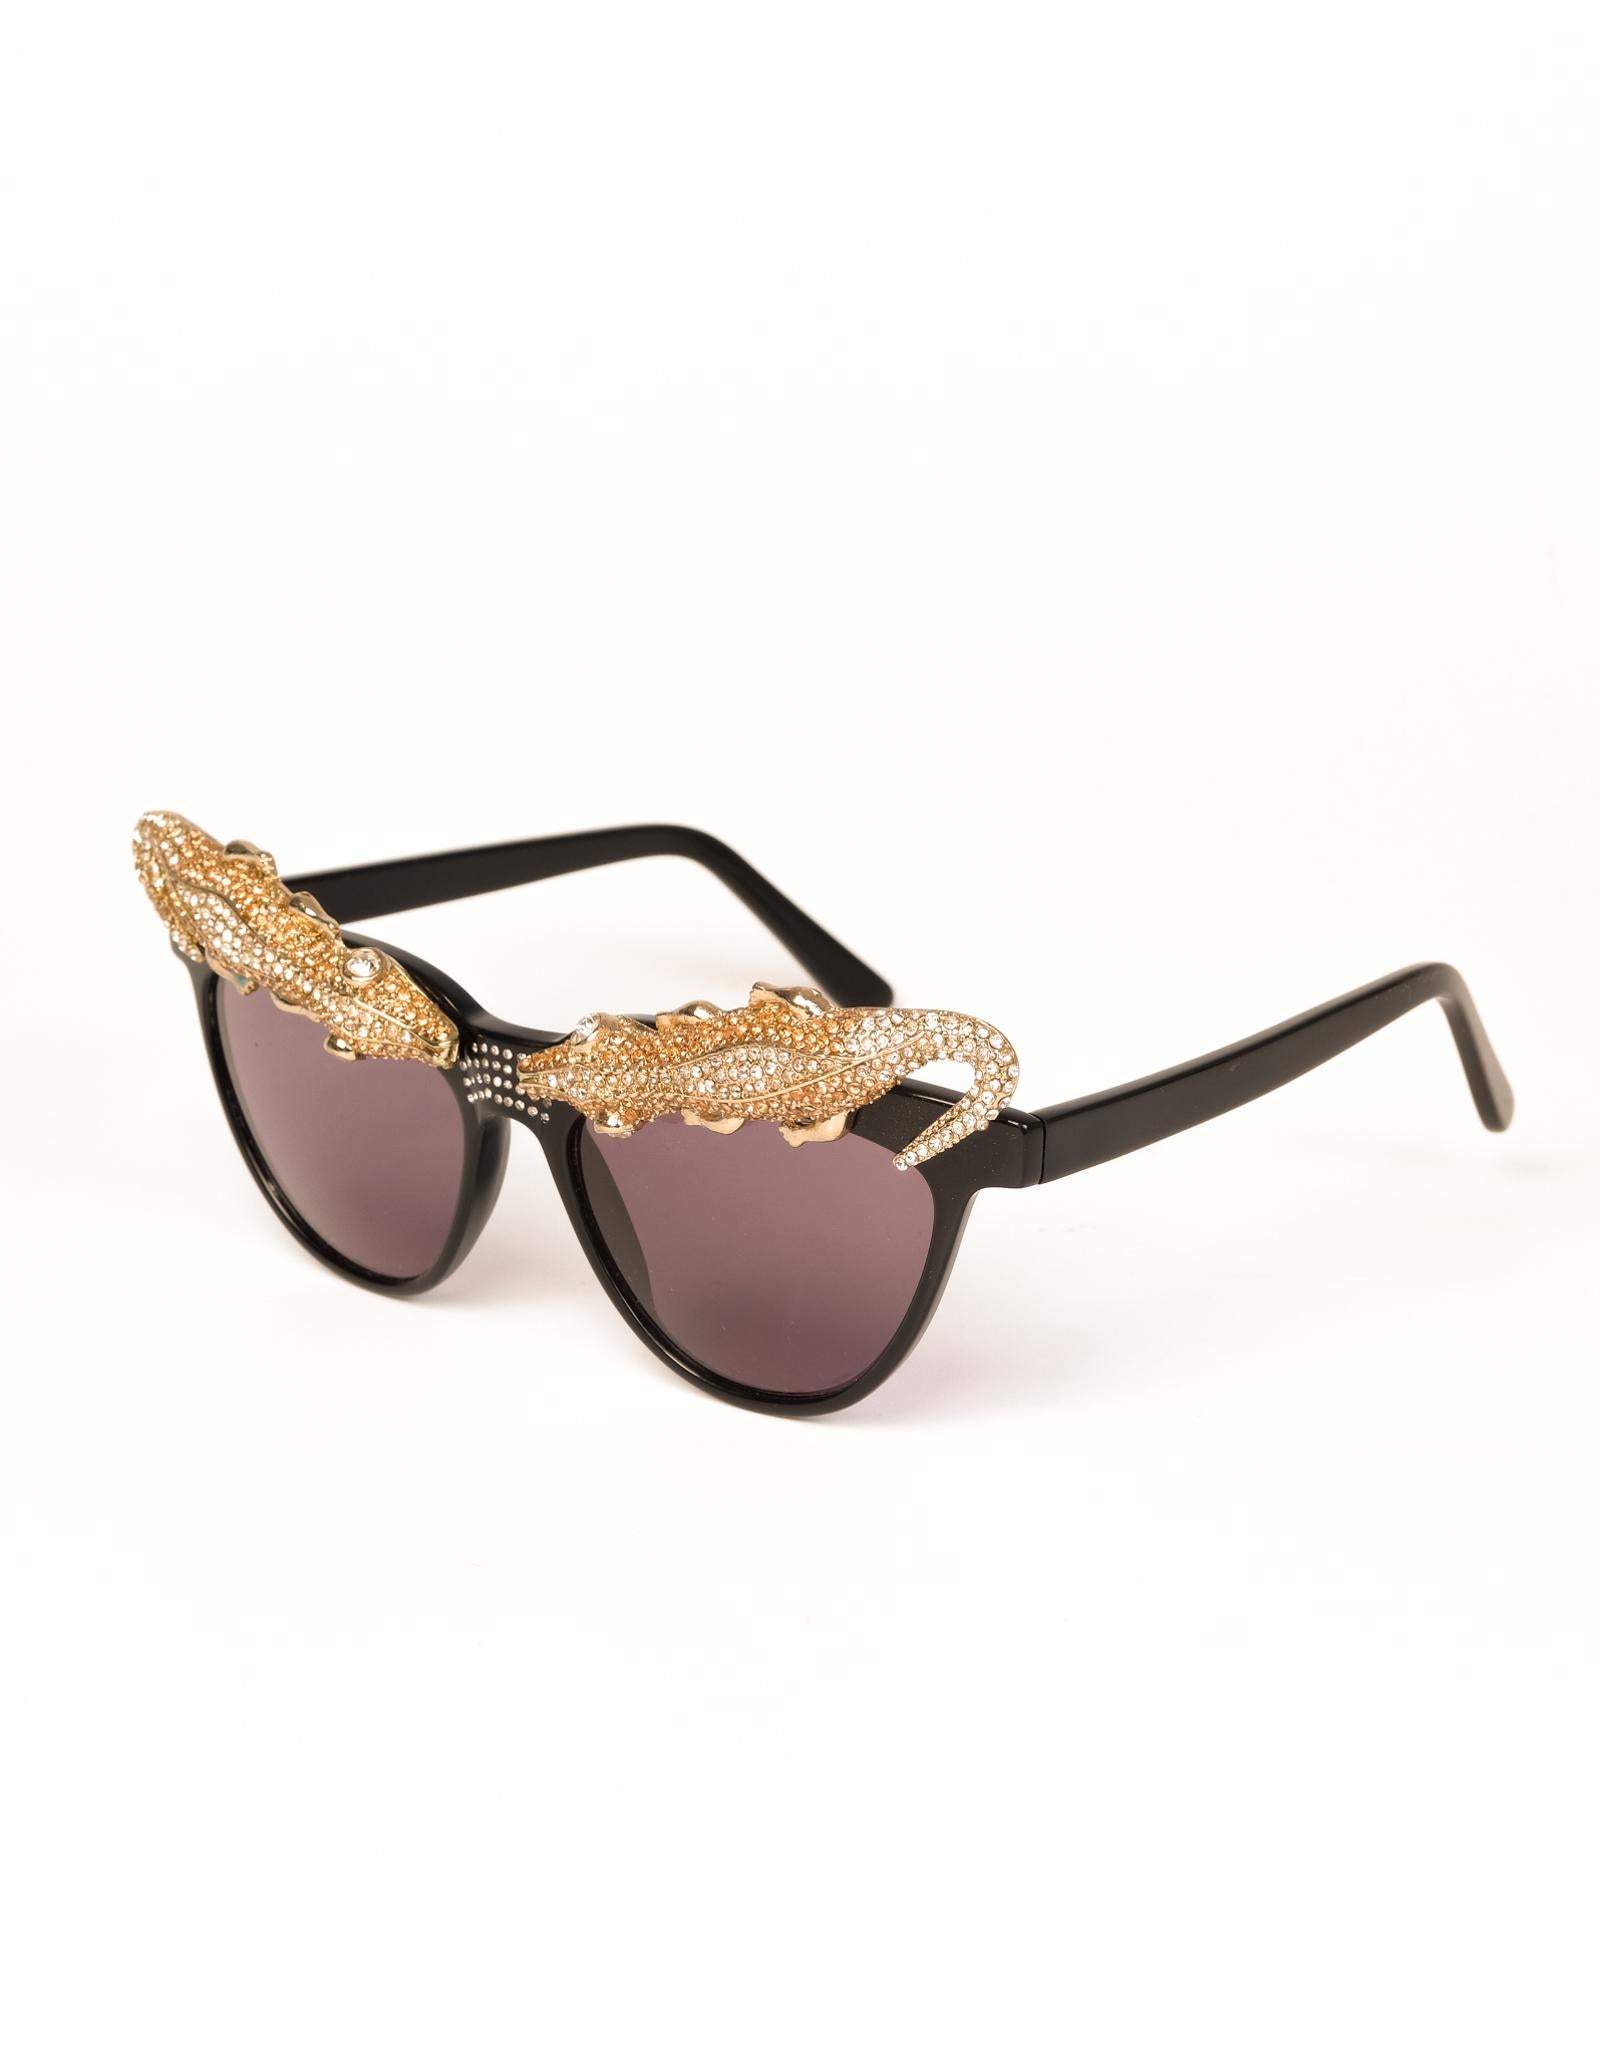 Anna Dello Russo signature over-the-top style is showcased in these alligator topped sunglasses designed for H&M. AdR sunglasses with black lens & frames decorated with . The black lens offer 100% UV protection.

BRAND: Anna Dello Russo X H&M
COLOR: